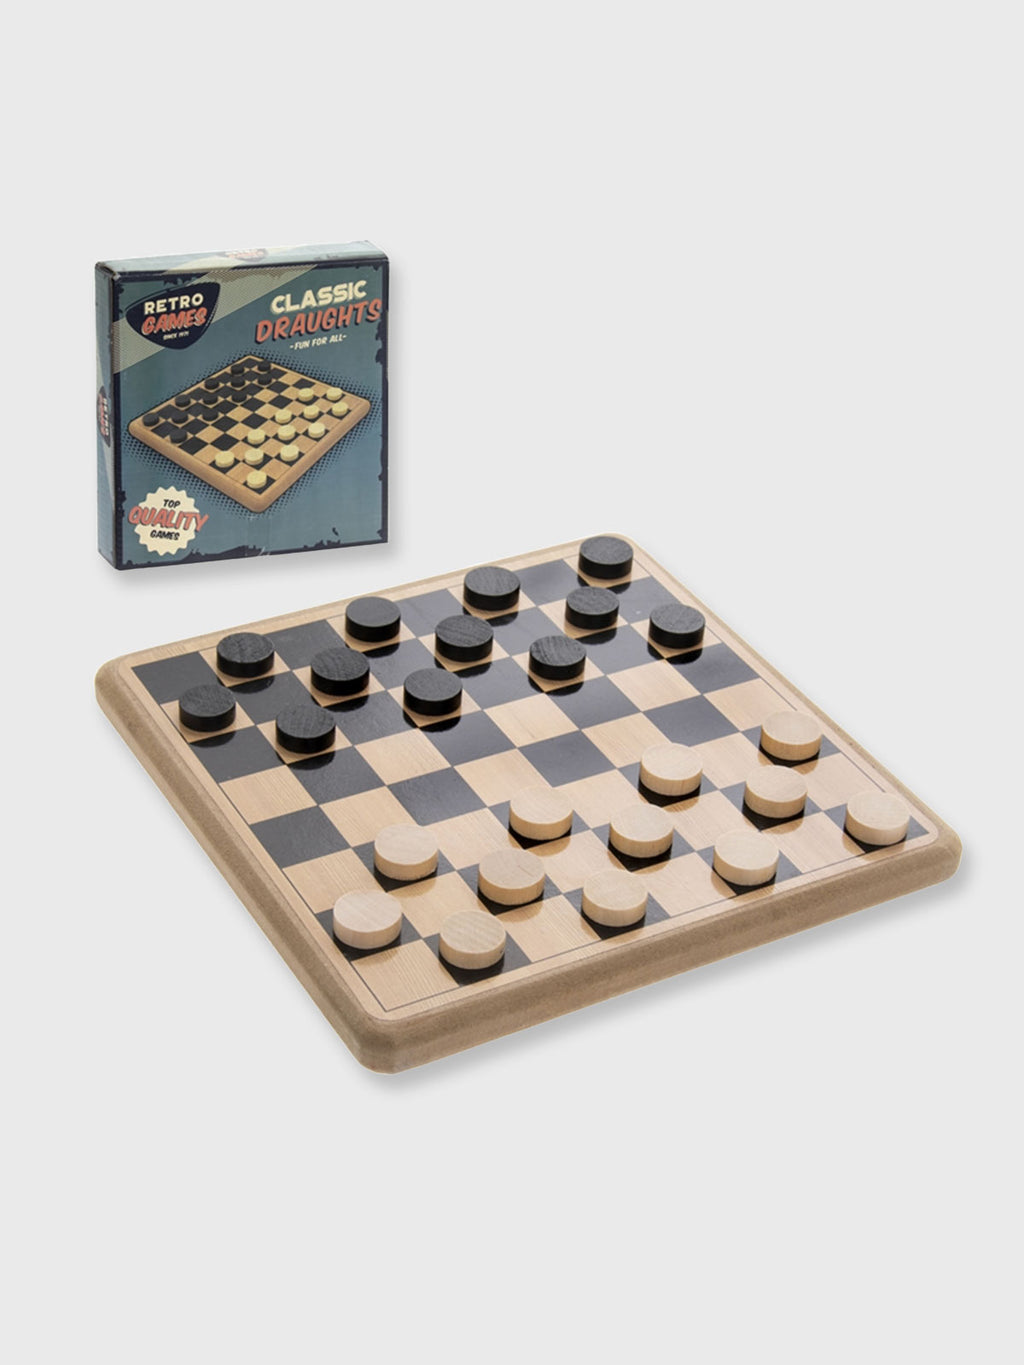 Retro Wooden Board Games - Draughts